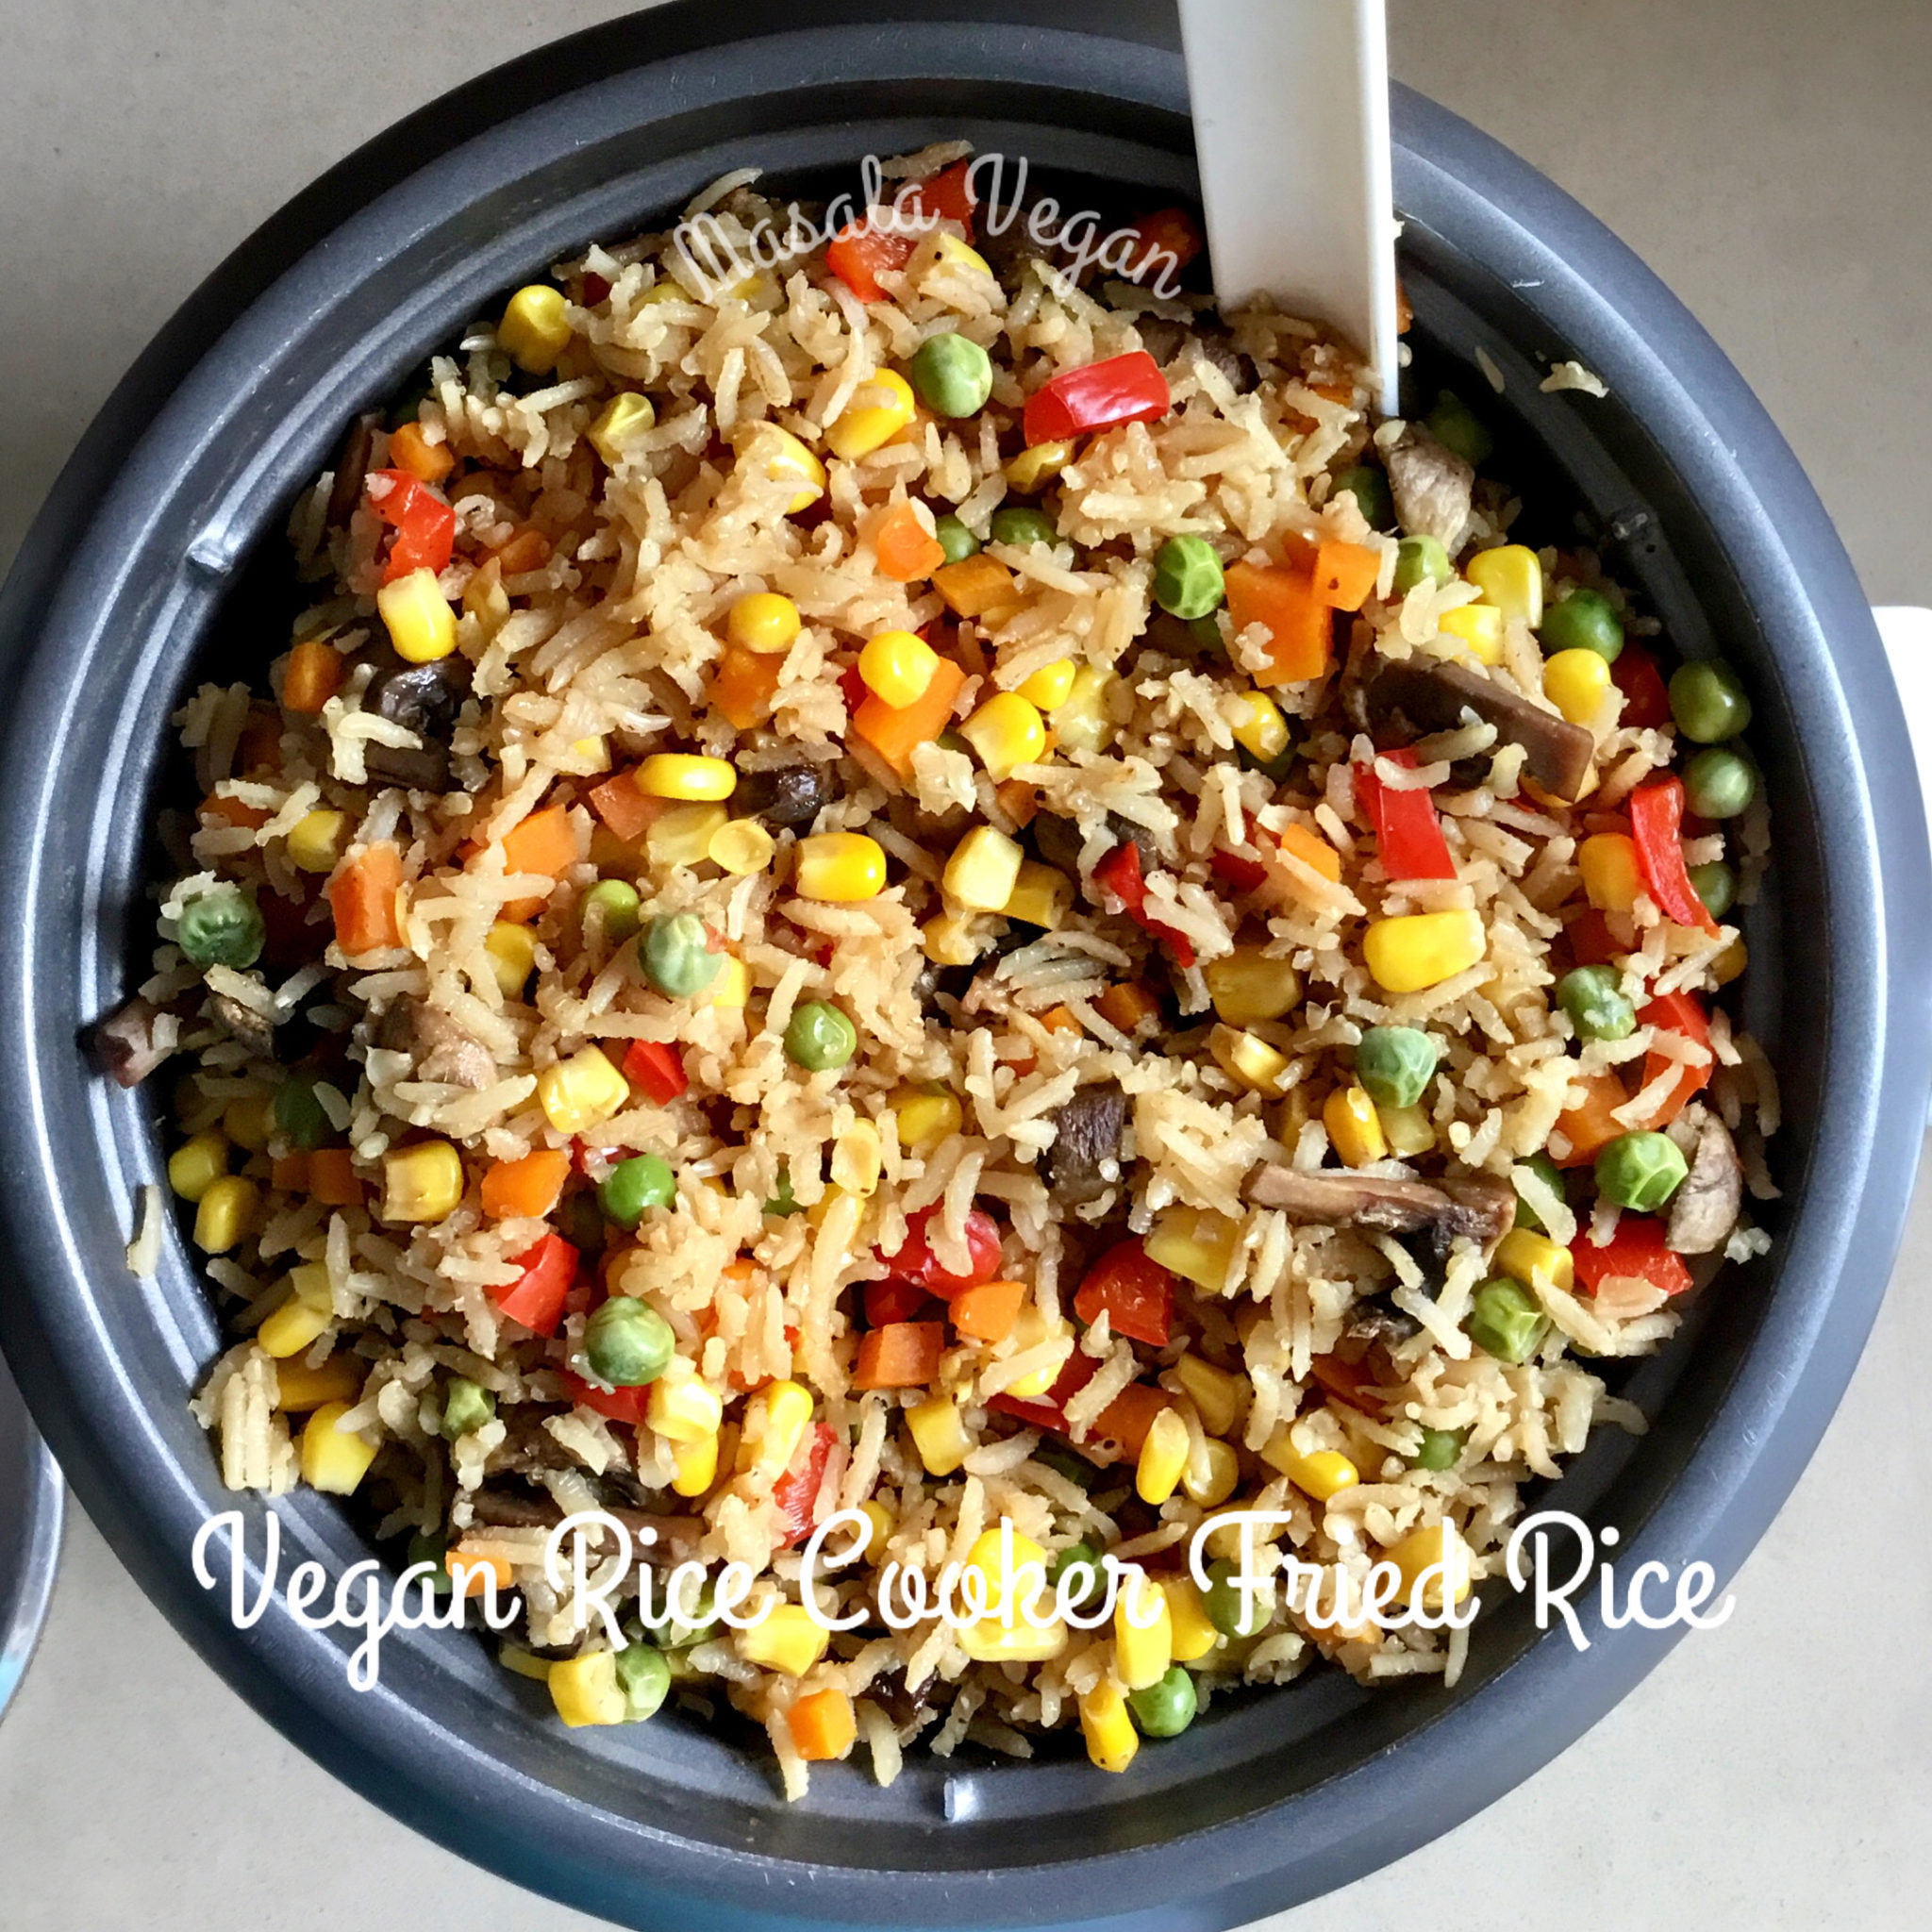 Grey rice cooker pot with fried rice showing brown basmati rice with carrot, corn, red capsicum pieces and green shallots